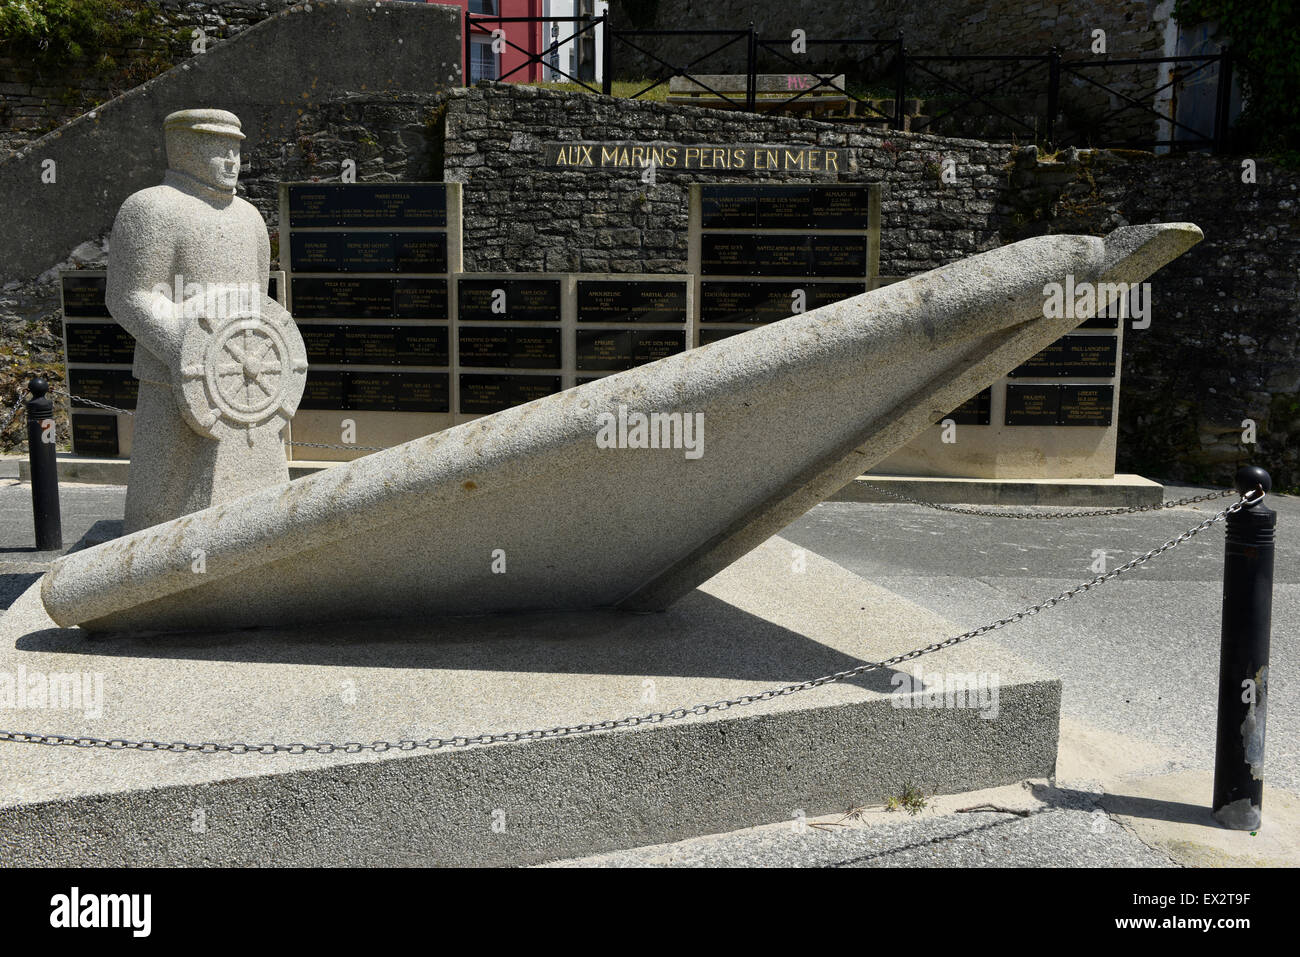 Memorial sculpture to sailors who perished at sea, Audierne, Finistère, Brittany, France. Stock Photo